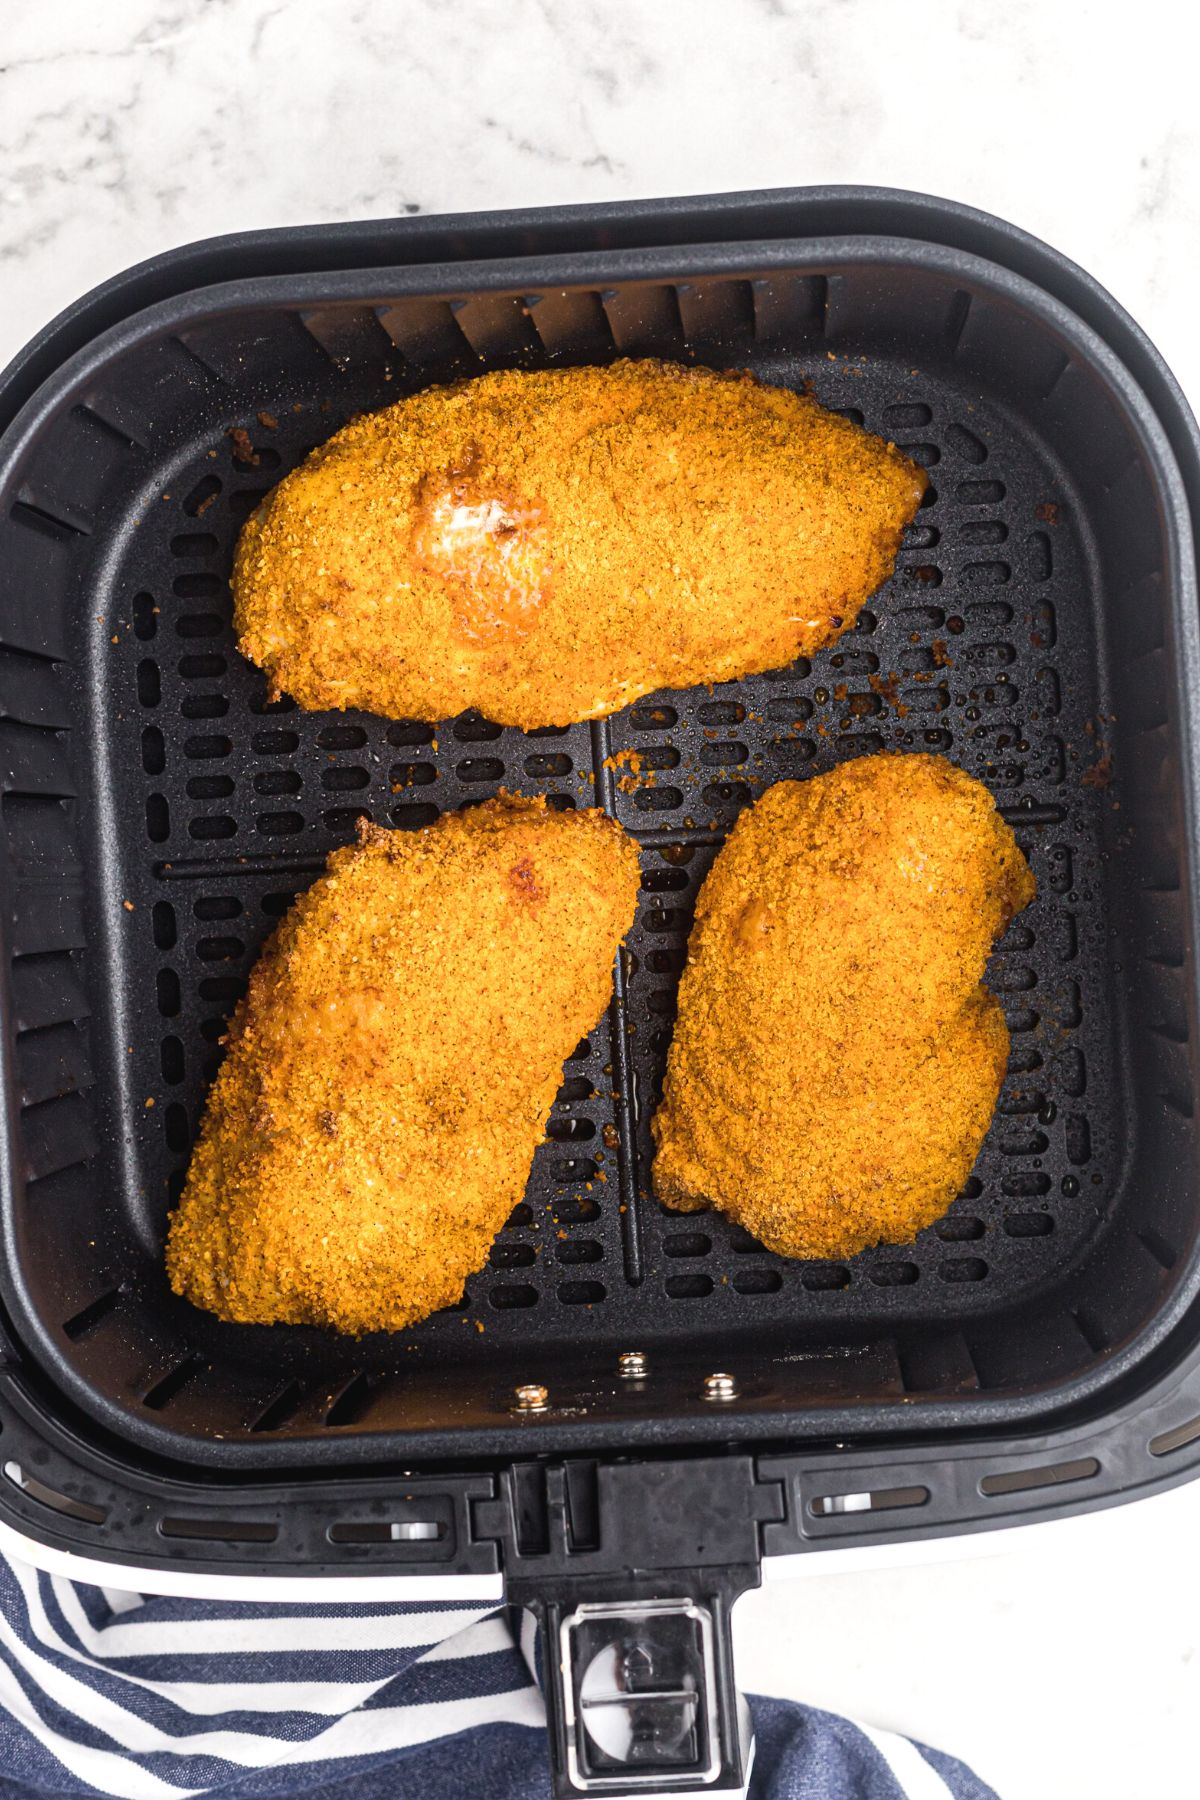 Crispy chicken coated with seasonings in the air fryer basket after being cooked